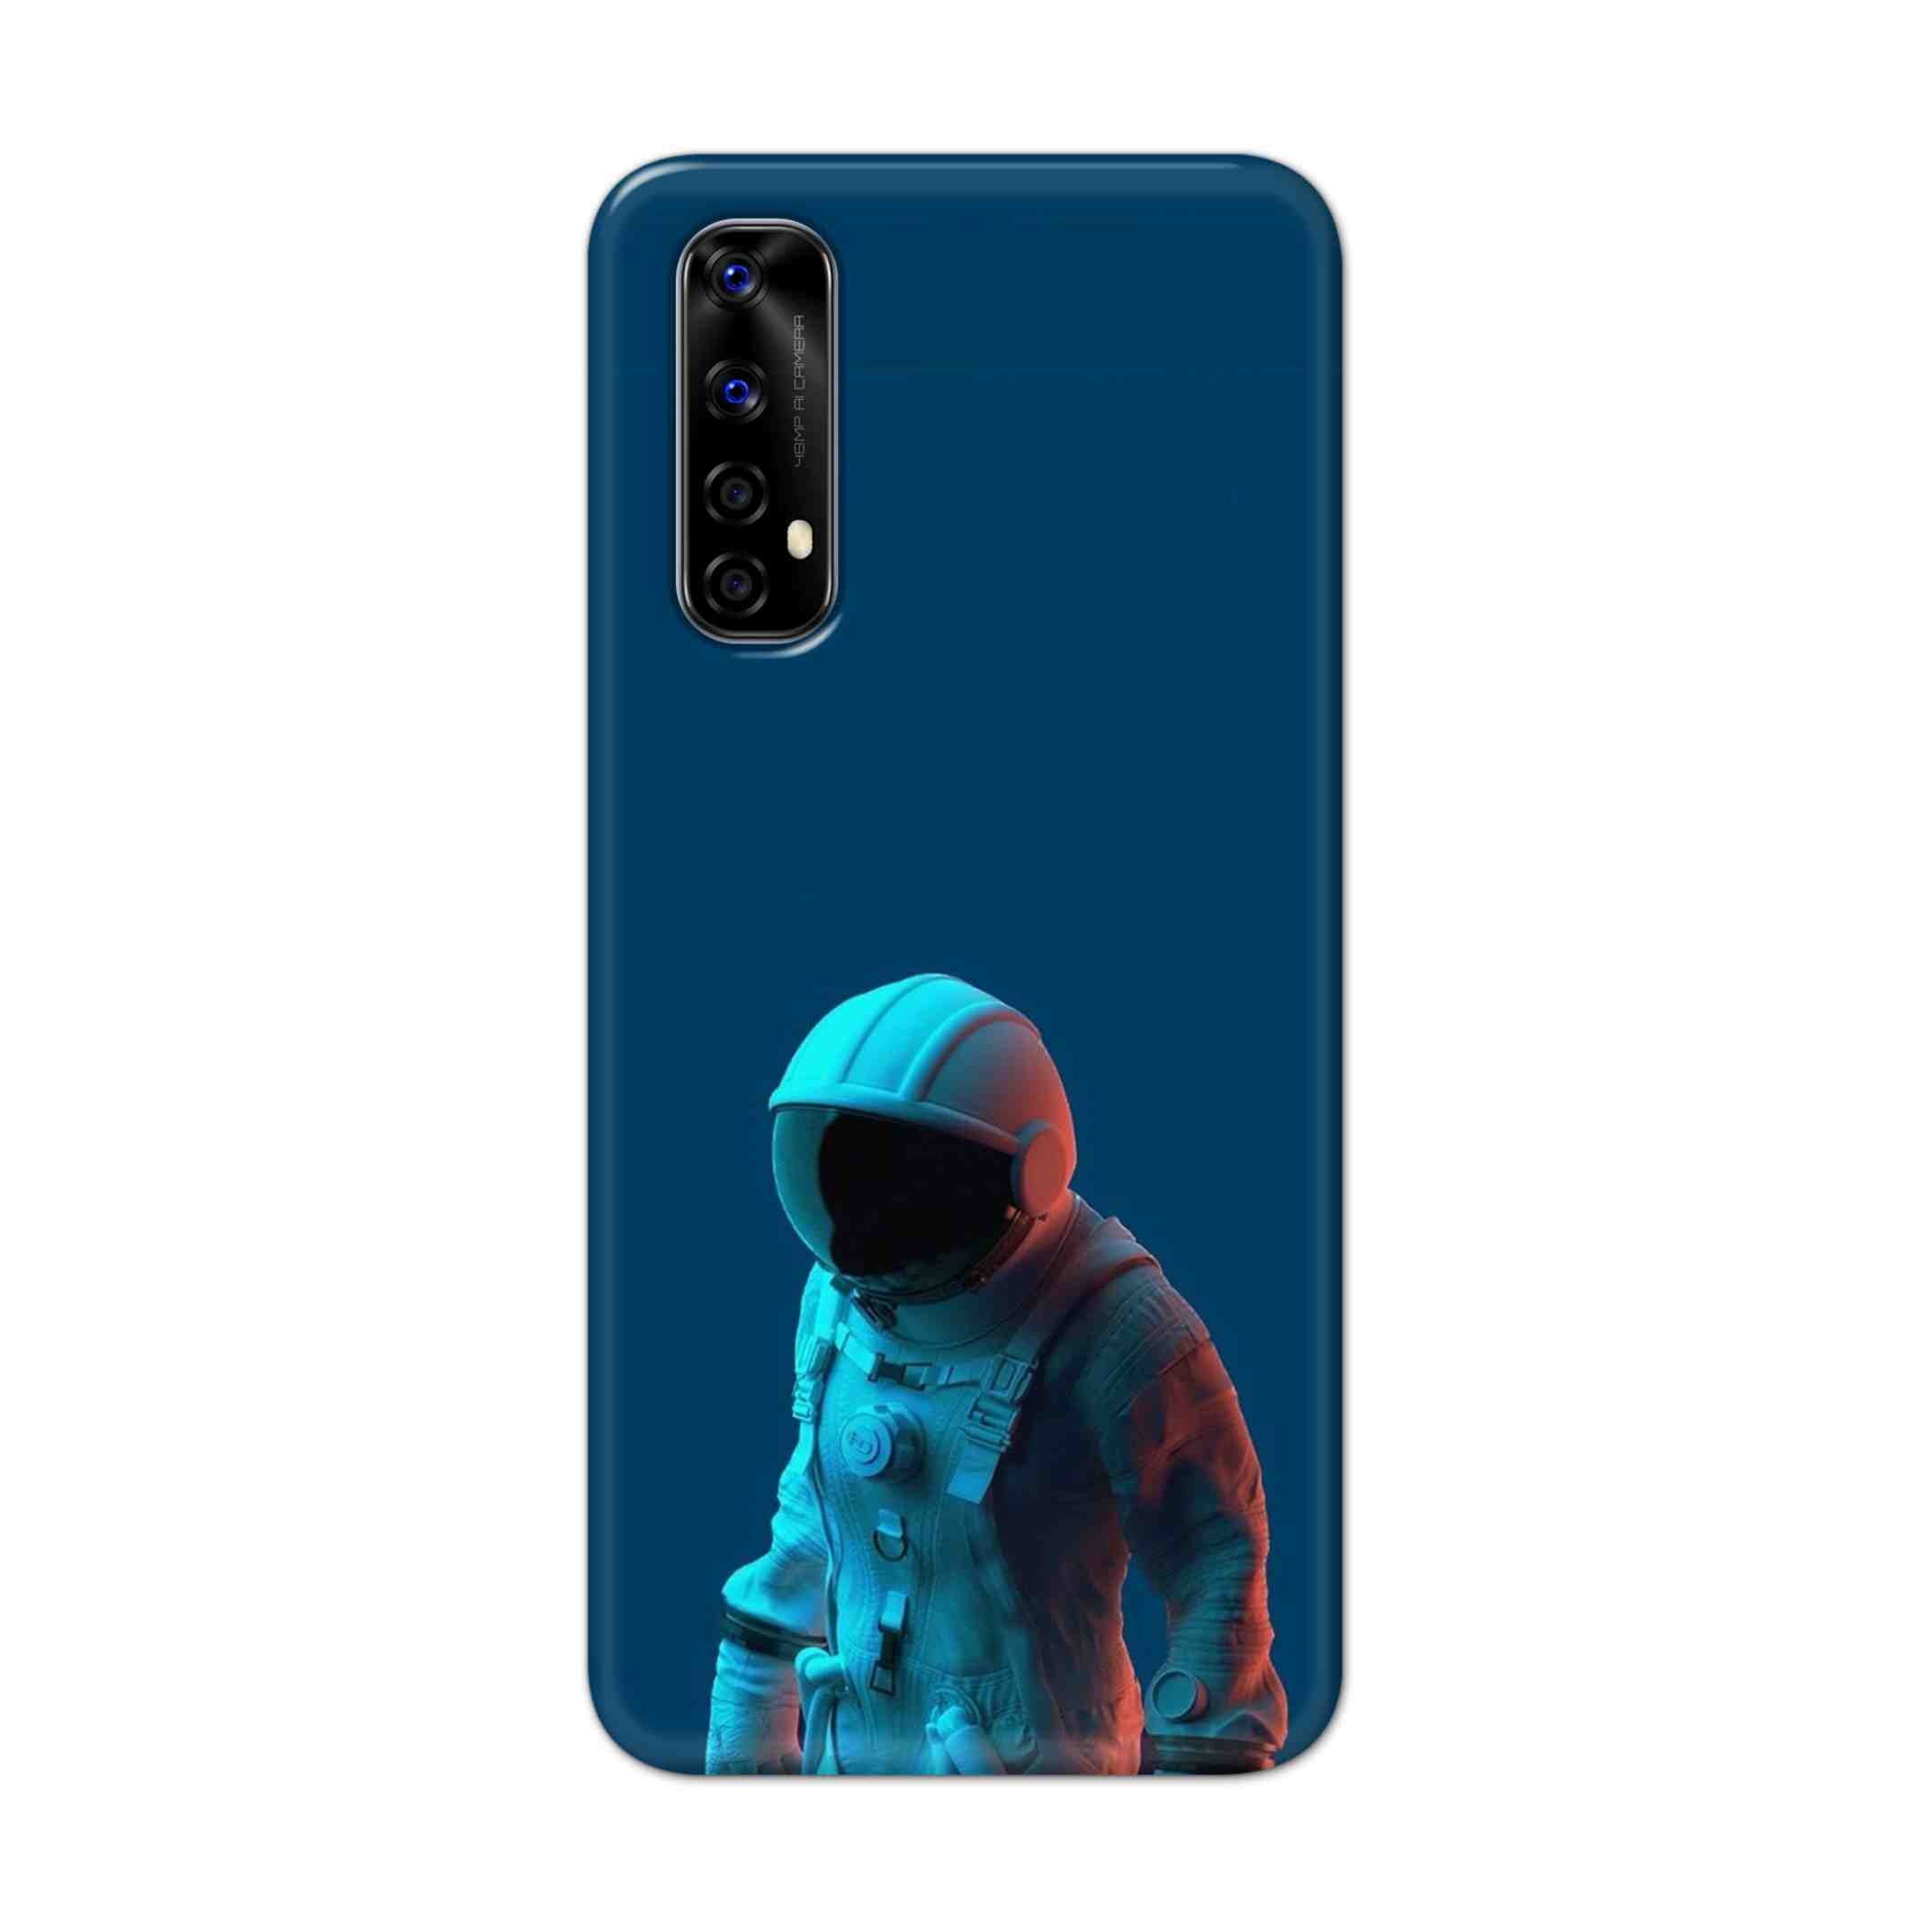 Buy Blue Astronaut Hard Back Mobile Phone Case Cover For Realme Narzo 20 Pro Online